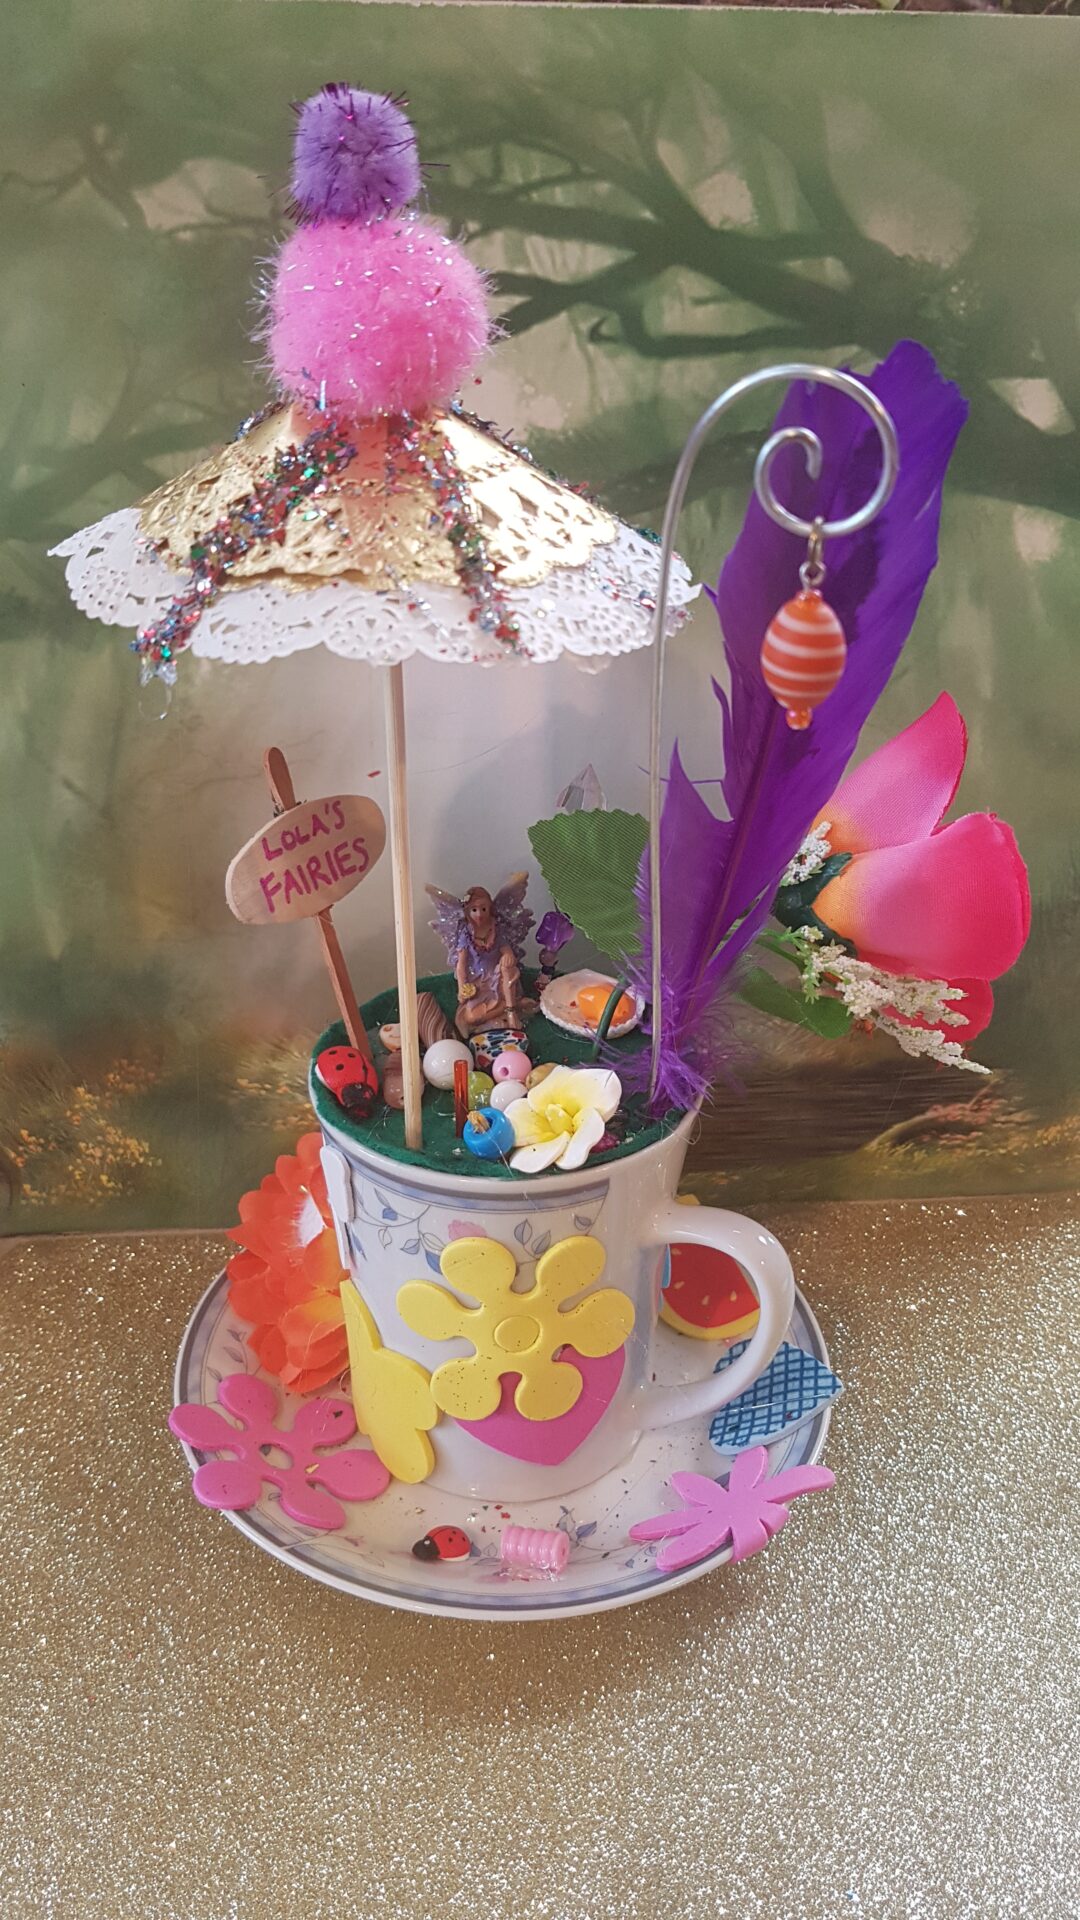 Image of Teacup Fun – Using Faux Flowers Create a Fairys garden, Mermaid cove or Dragons lair event